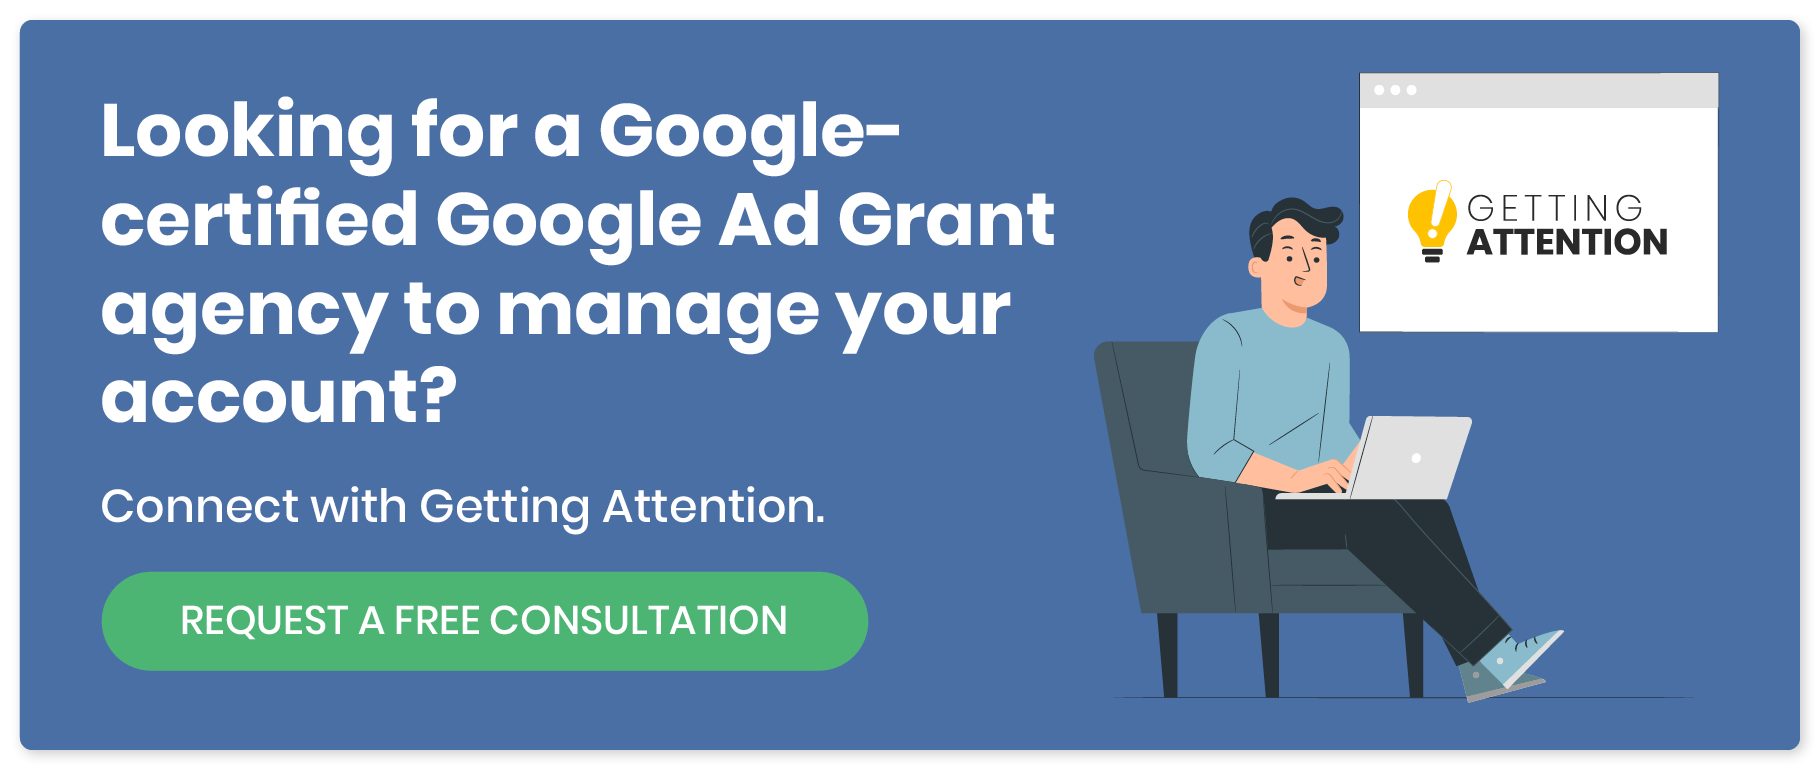 Looking for a Google-certified Google Ad Grant agency to manage your account? Connect with Getting Attention. Request a free consultation. 